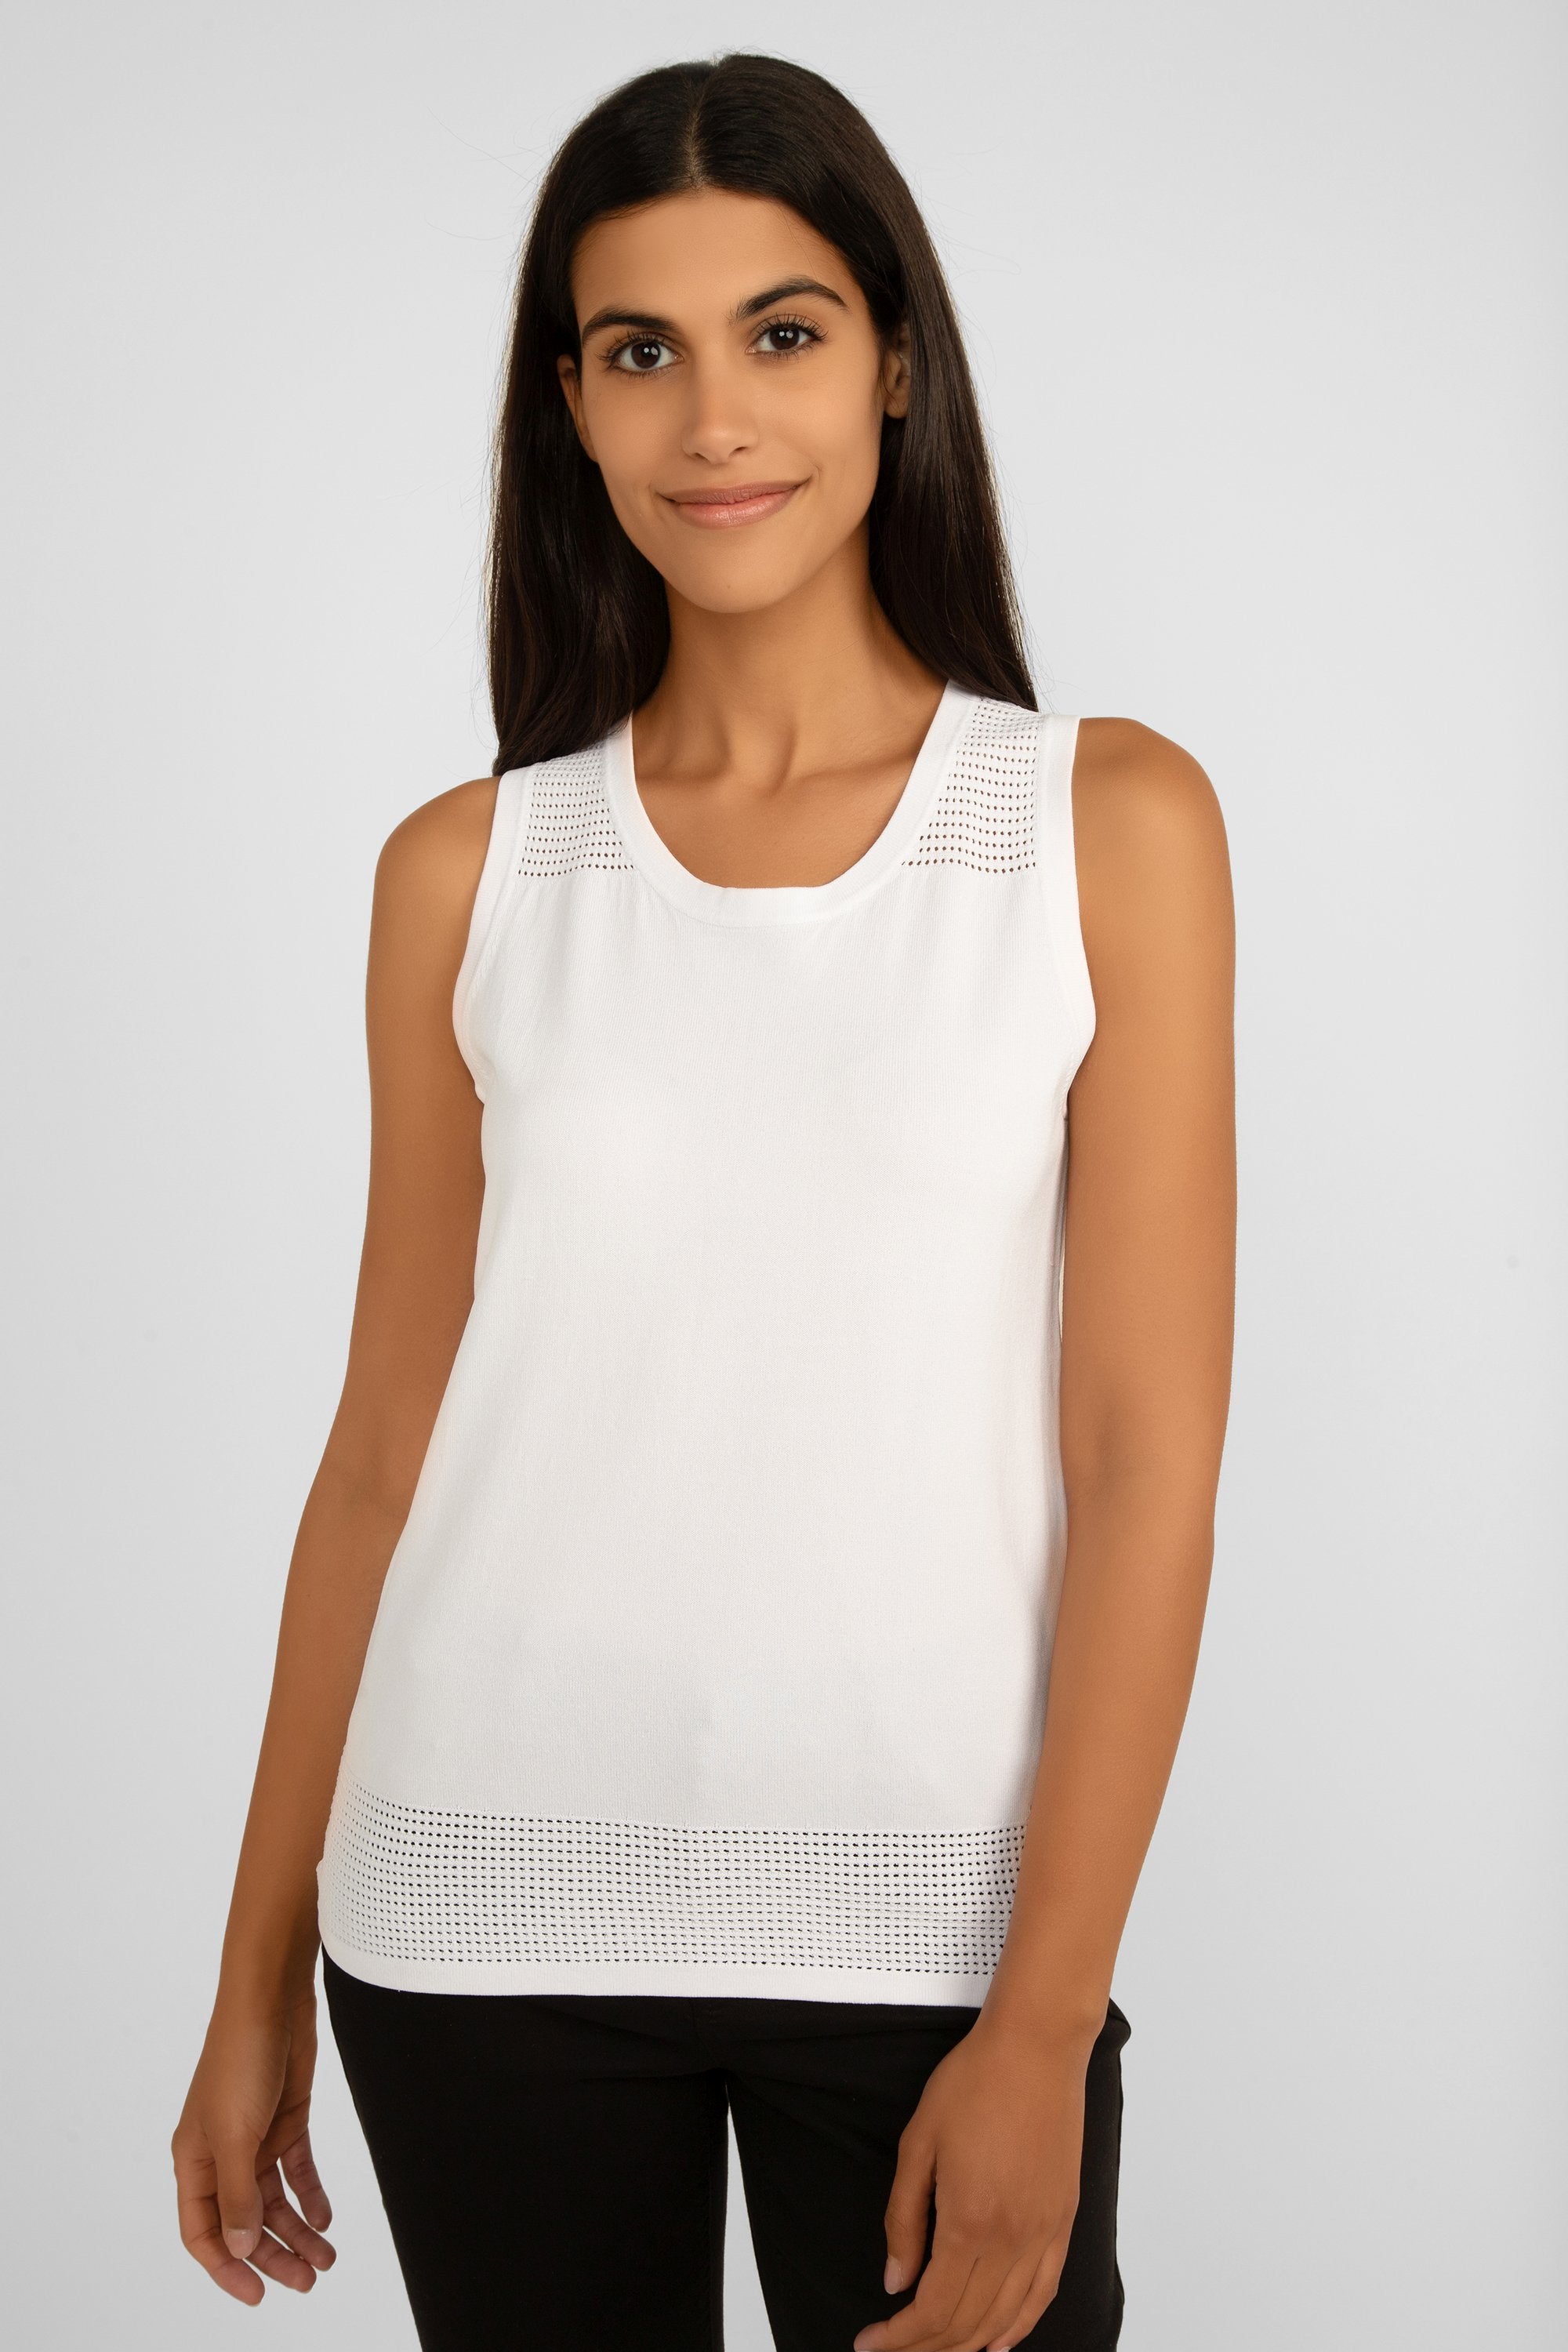 Picadilly (JK354) Women's Sleeveless Sweater Knit Tank with Mesh Panels on Shoulders and Hem in White